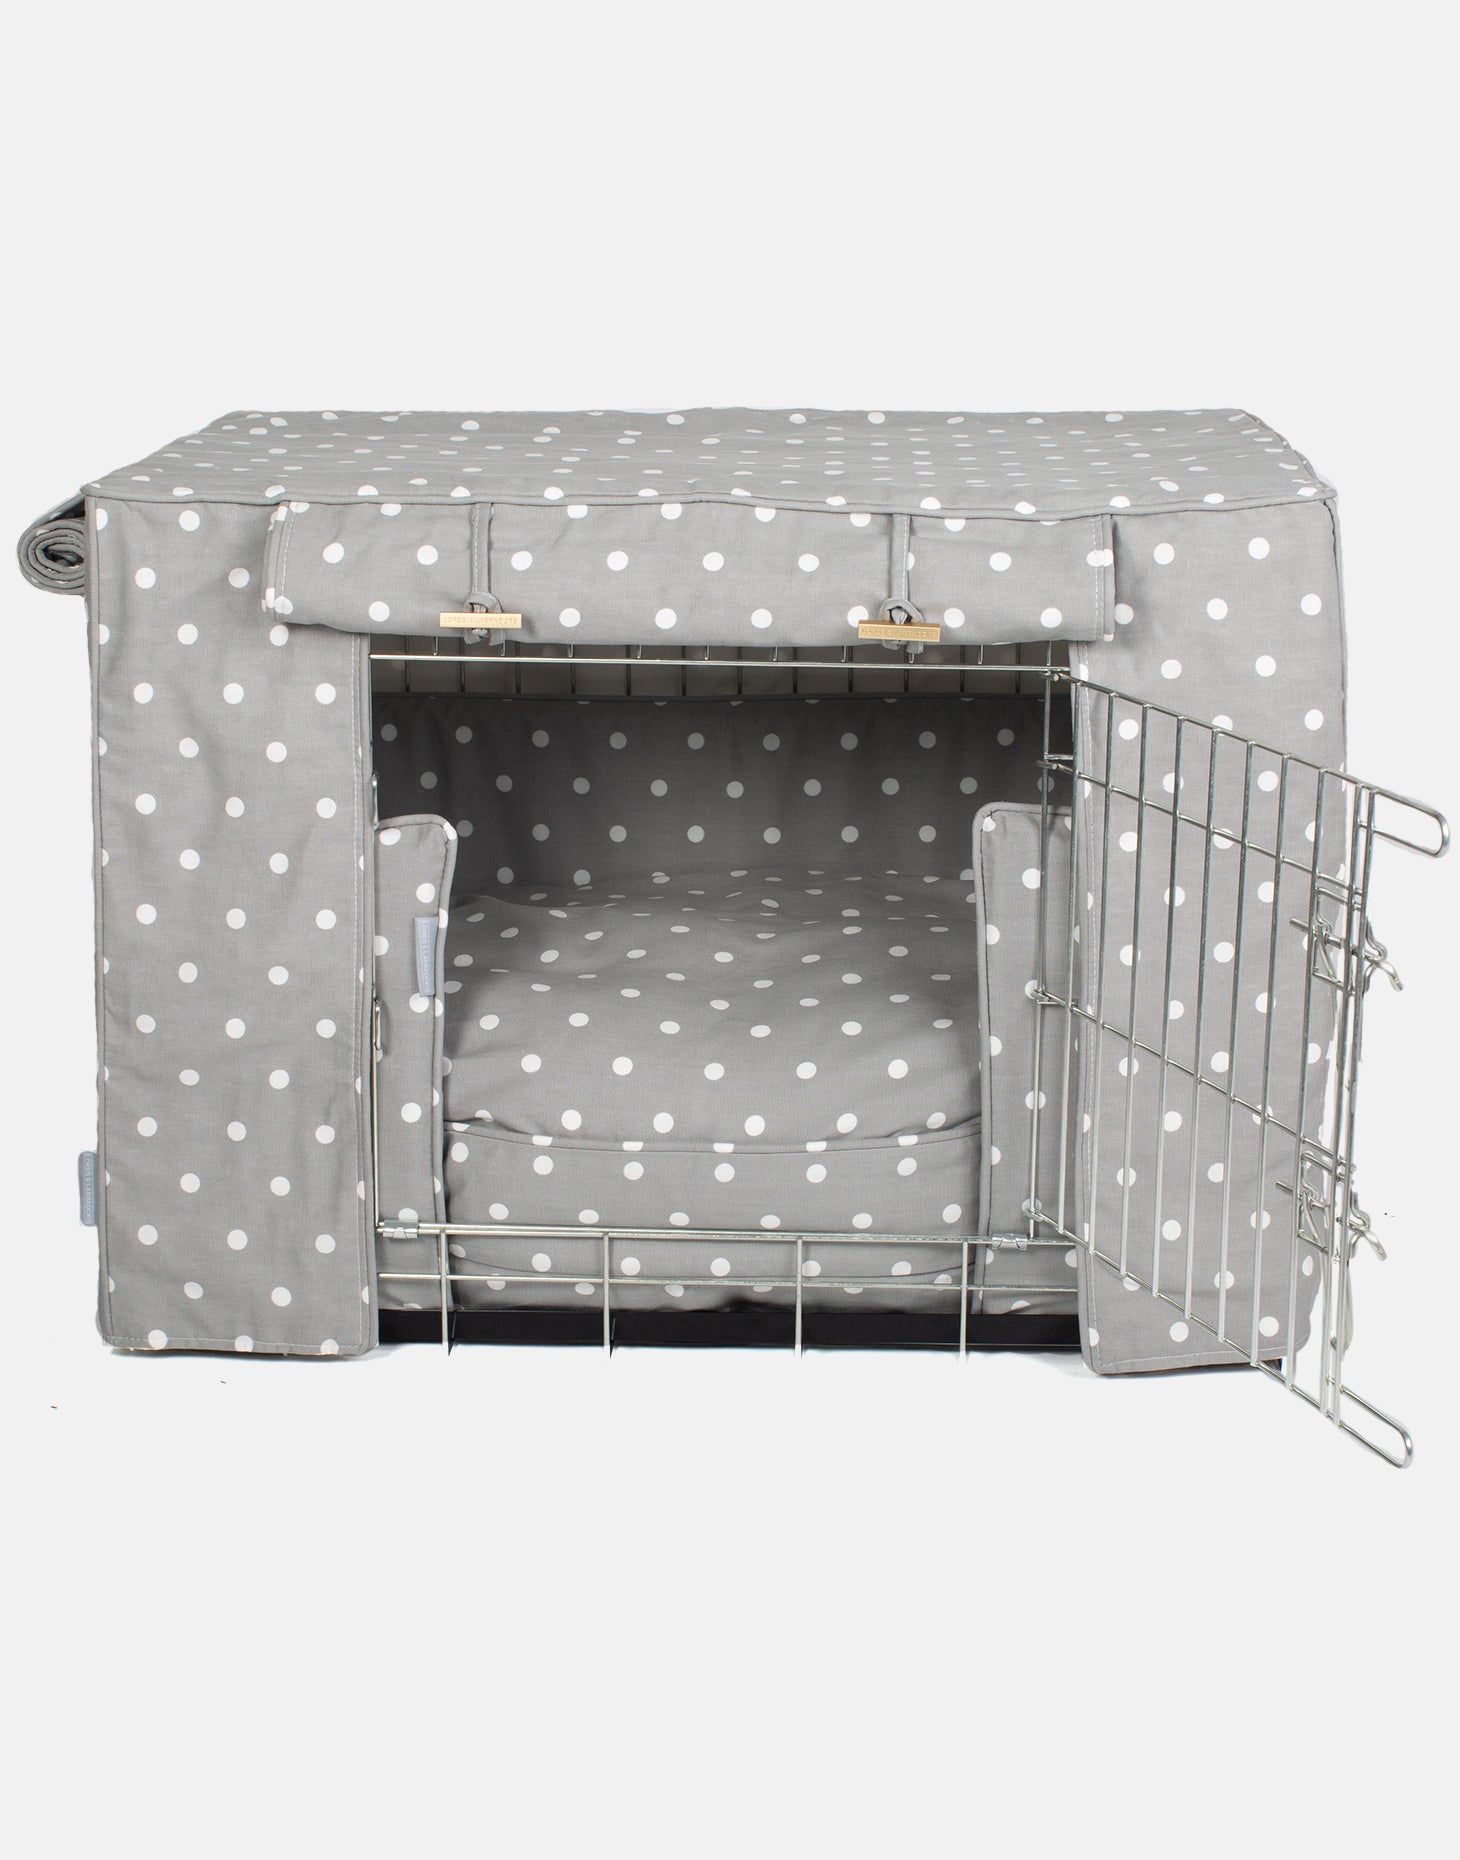 Dog Crate Set in Grey Spot by Lords & Labradors